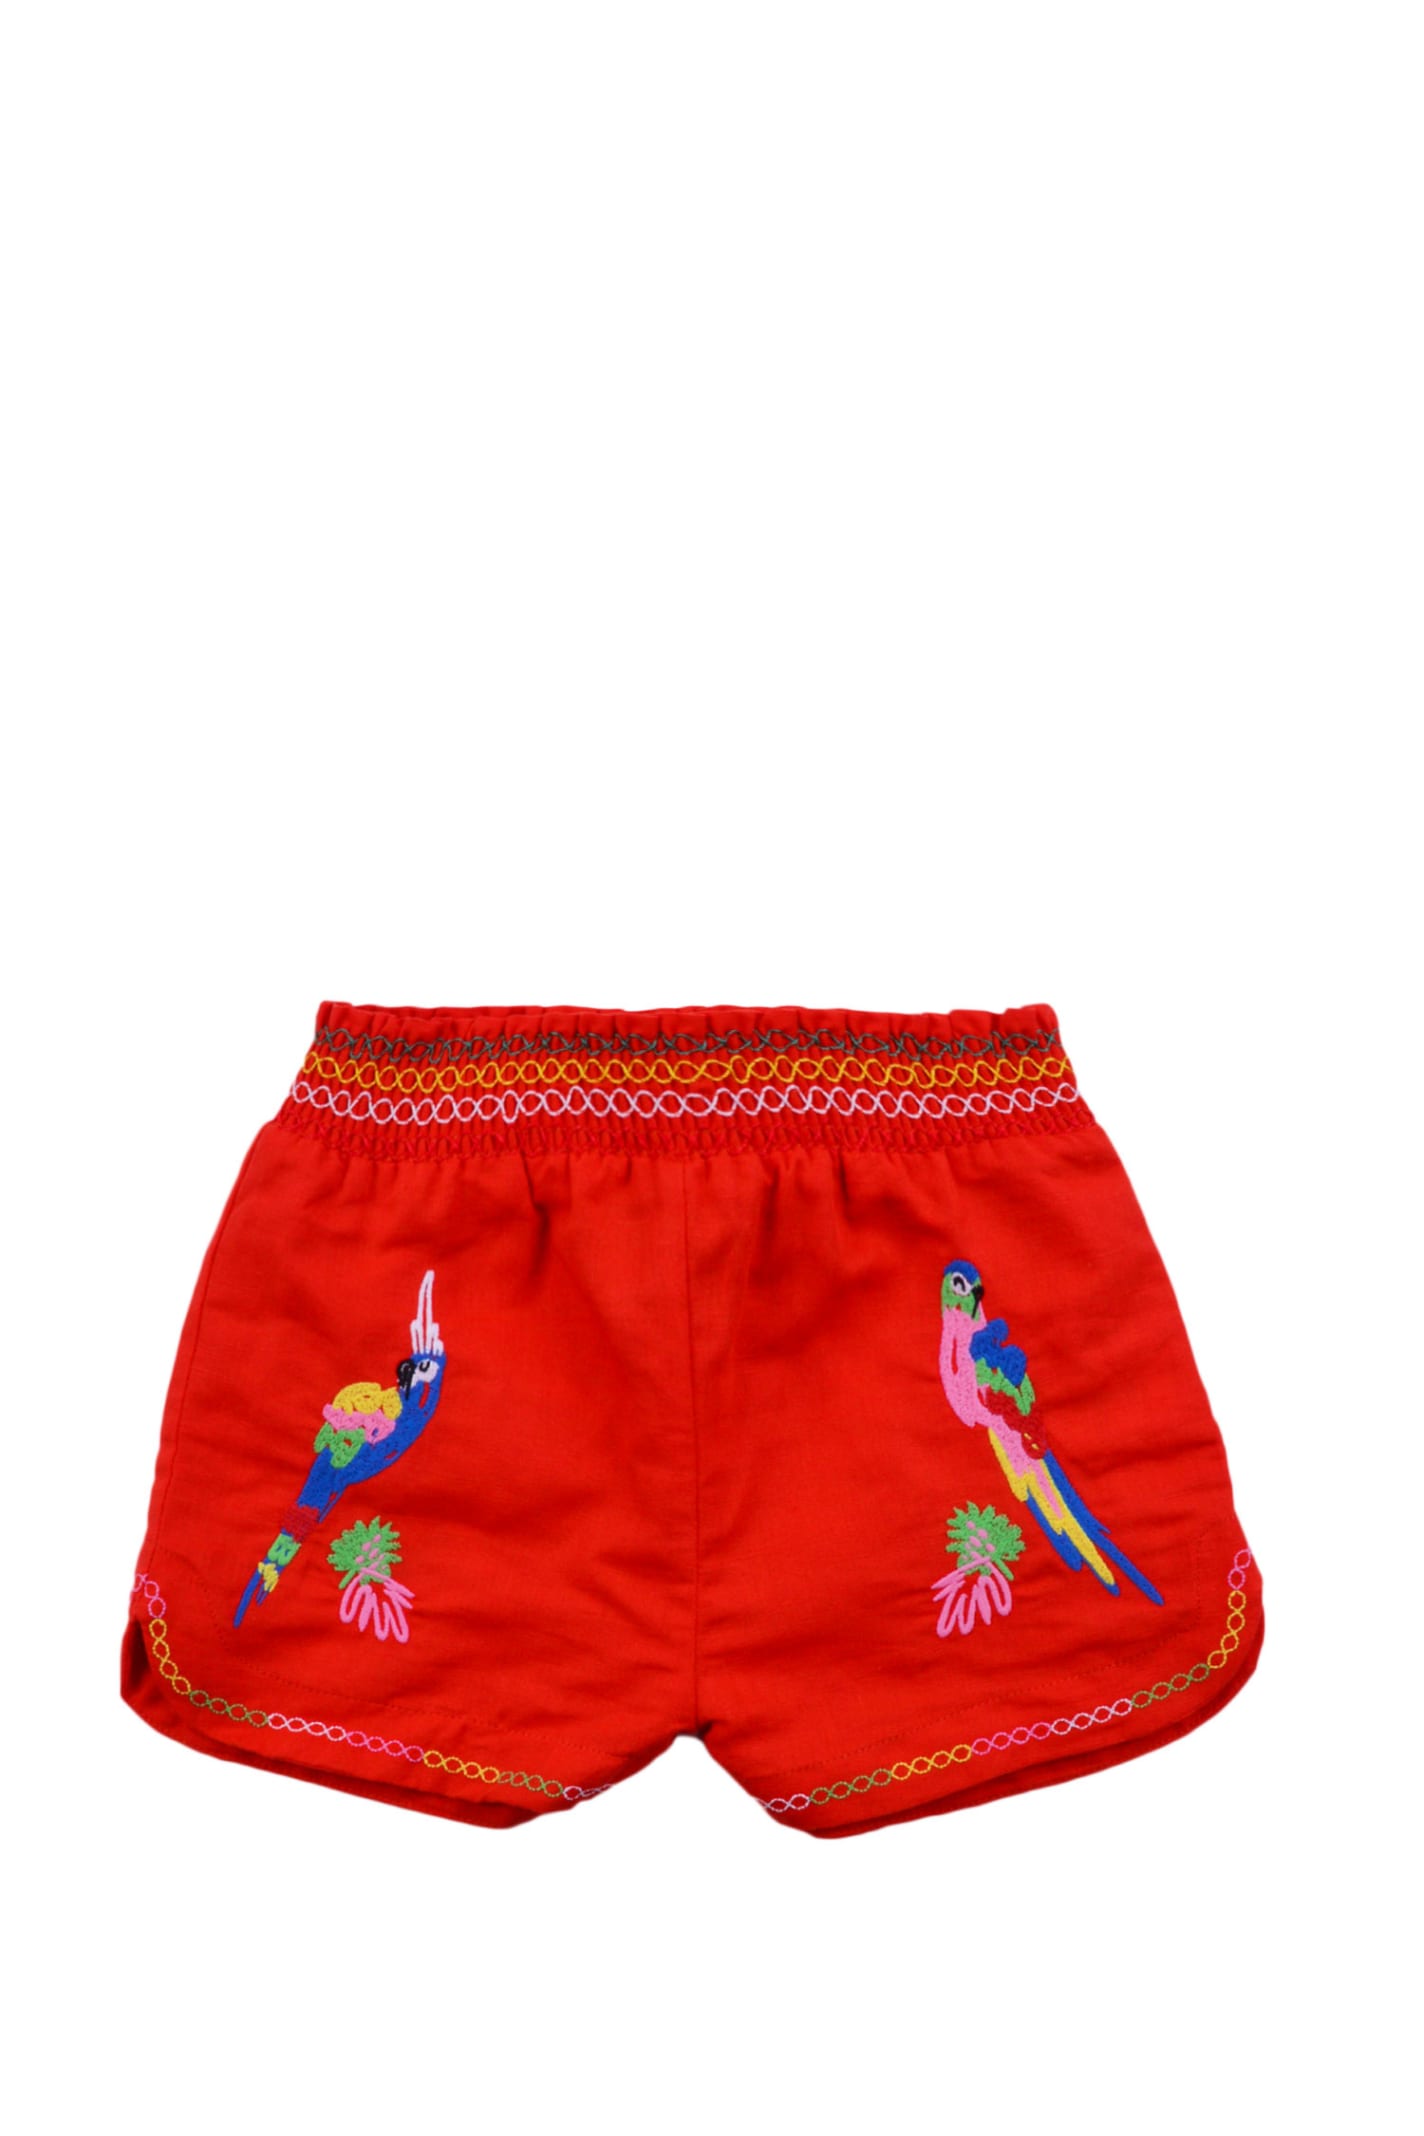 STELLA MCCARTNEY SHORTS WITH PARROTS EMBROIDERY